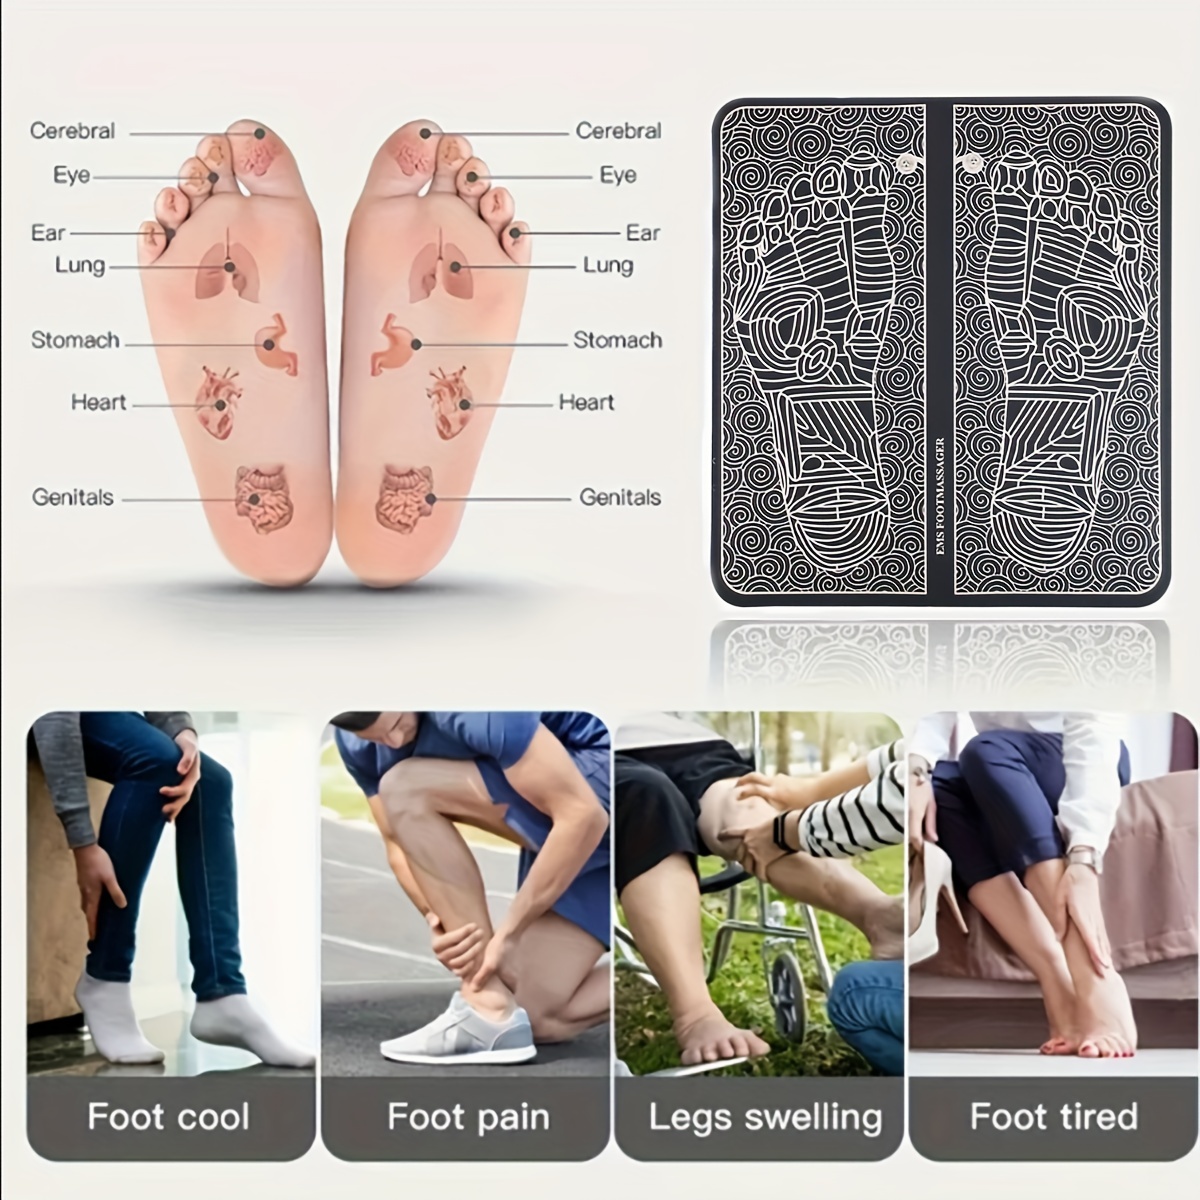 Electric Foot Therapy Massage Pad